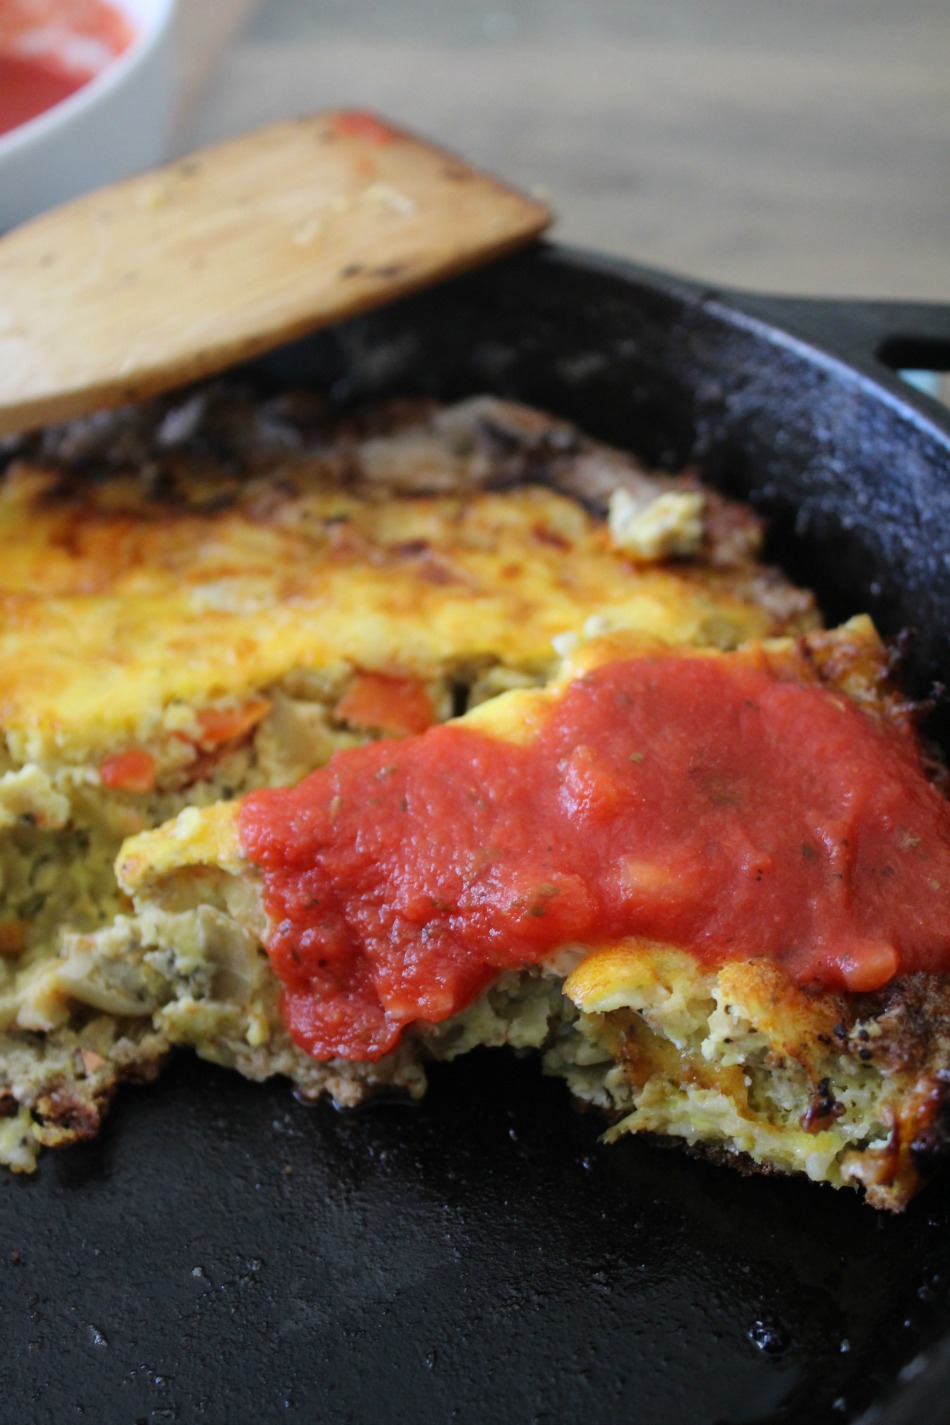 Saucy Mediterranean Frittata: A Savory Dish For Any Meal Of The Day | Growing Up Herbal | Enjoy this deliciously healthy egg-based recipe any time of the day. It's quick and easy to make. Perfect for busy mamas!